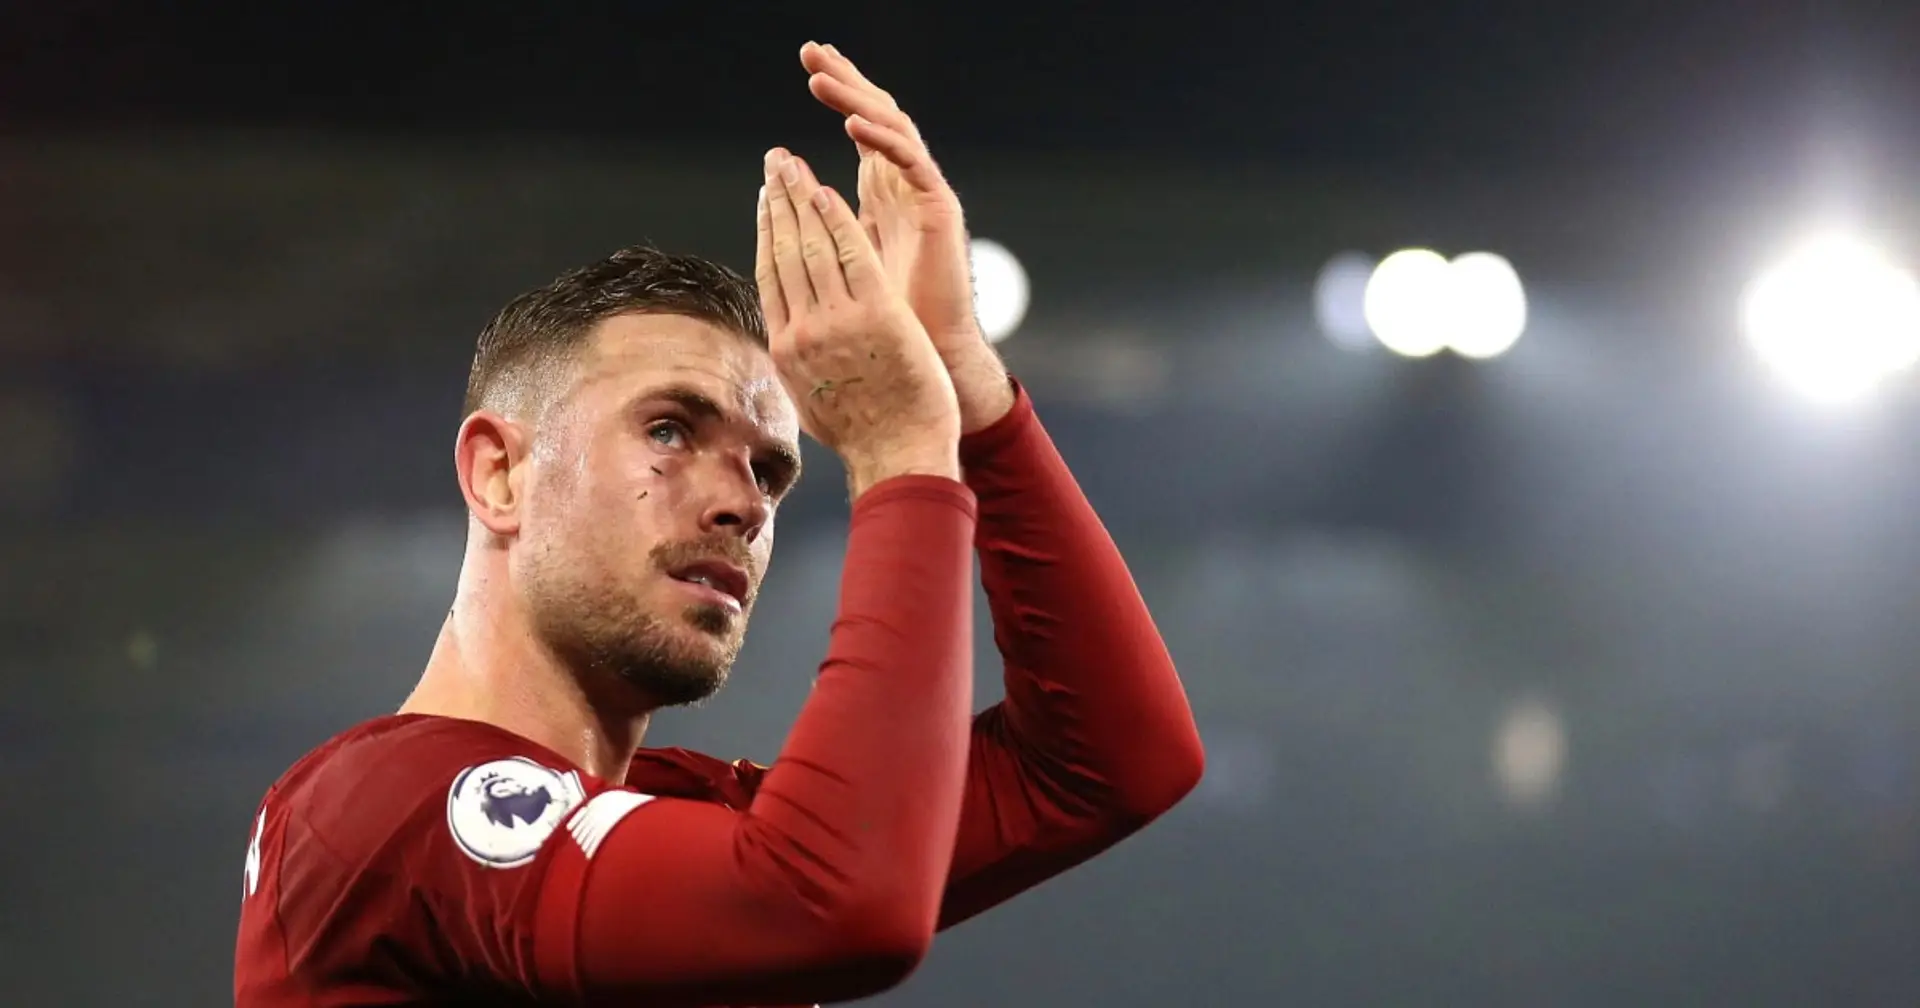 Jordan Henderson agrees to join FA panel to advise on how to improve diversity in football